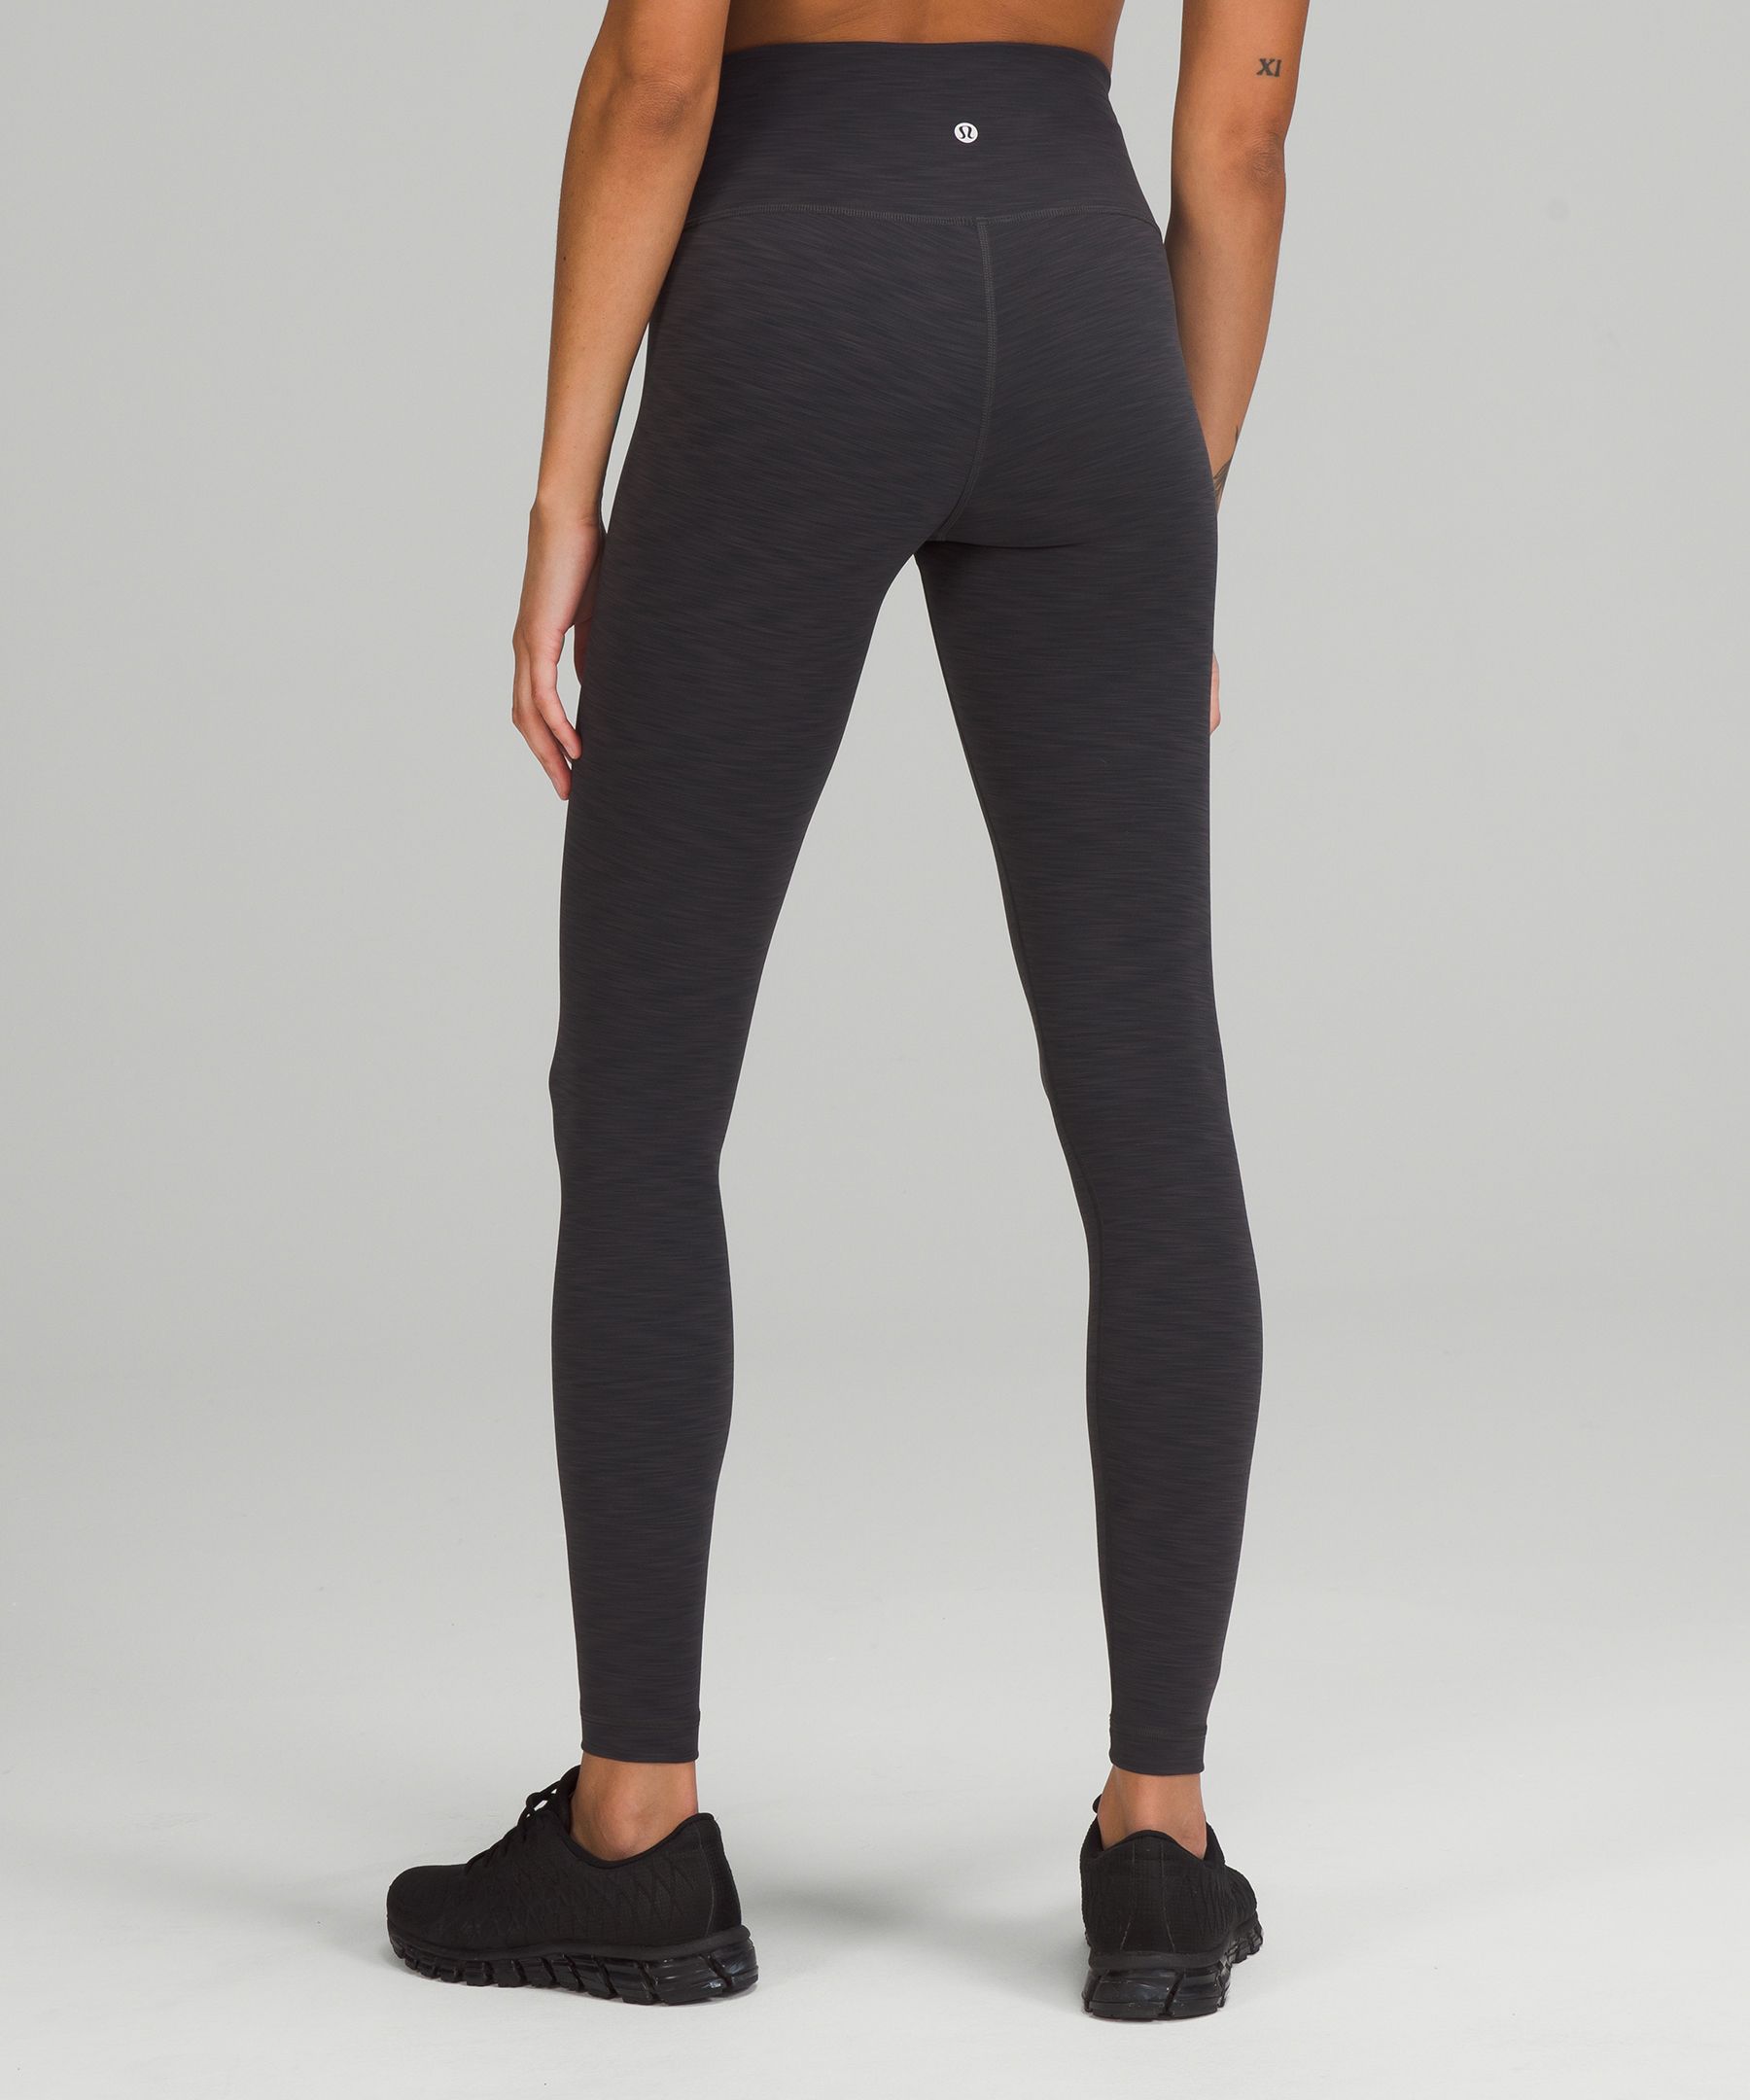 Lululemon Wunder Train High-Rise Tight 28 Size 4 - $50 - From Esther